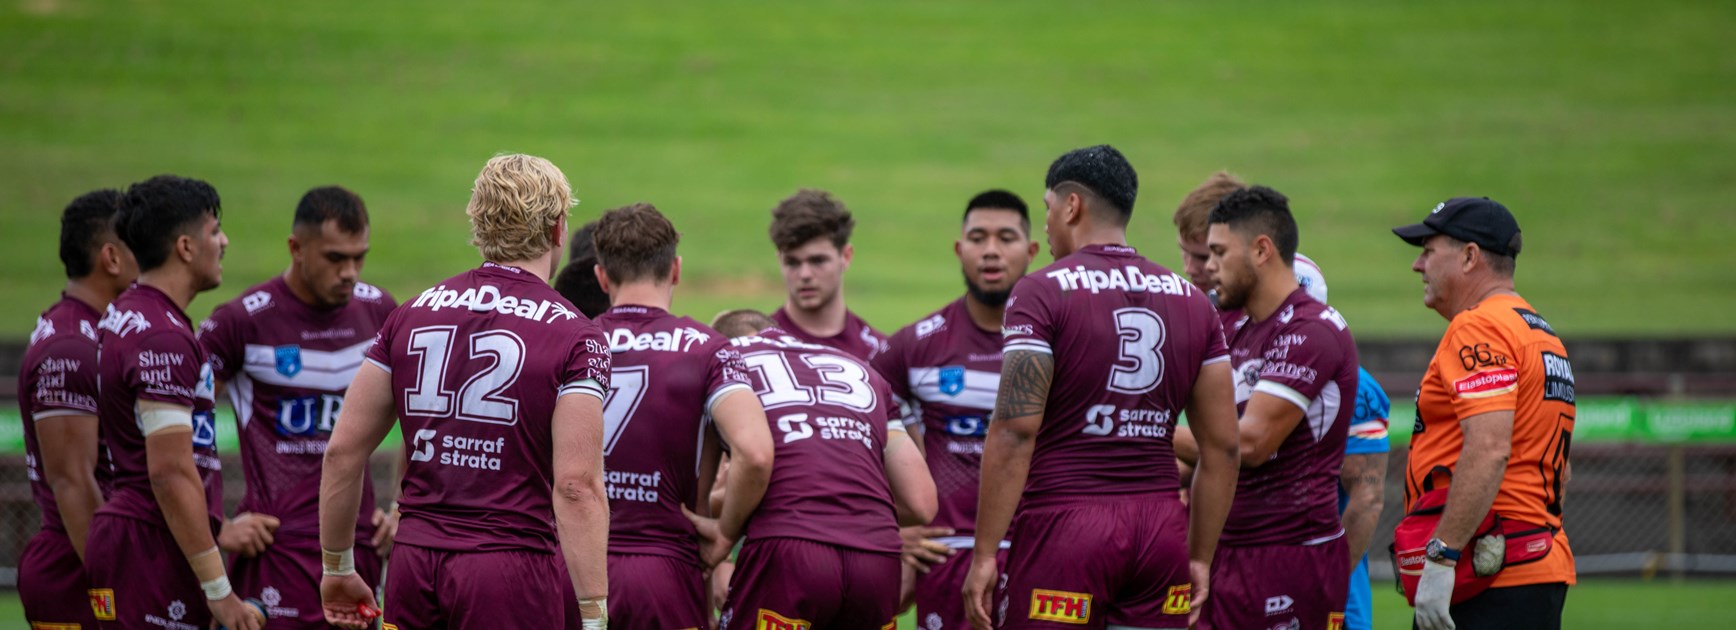 Manly team to play Newcastle